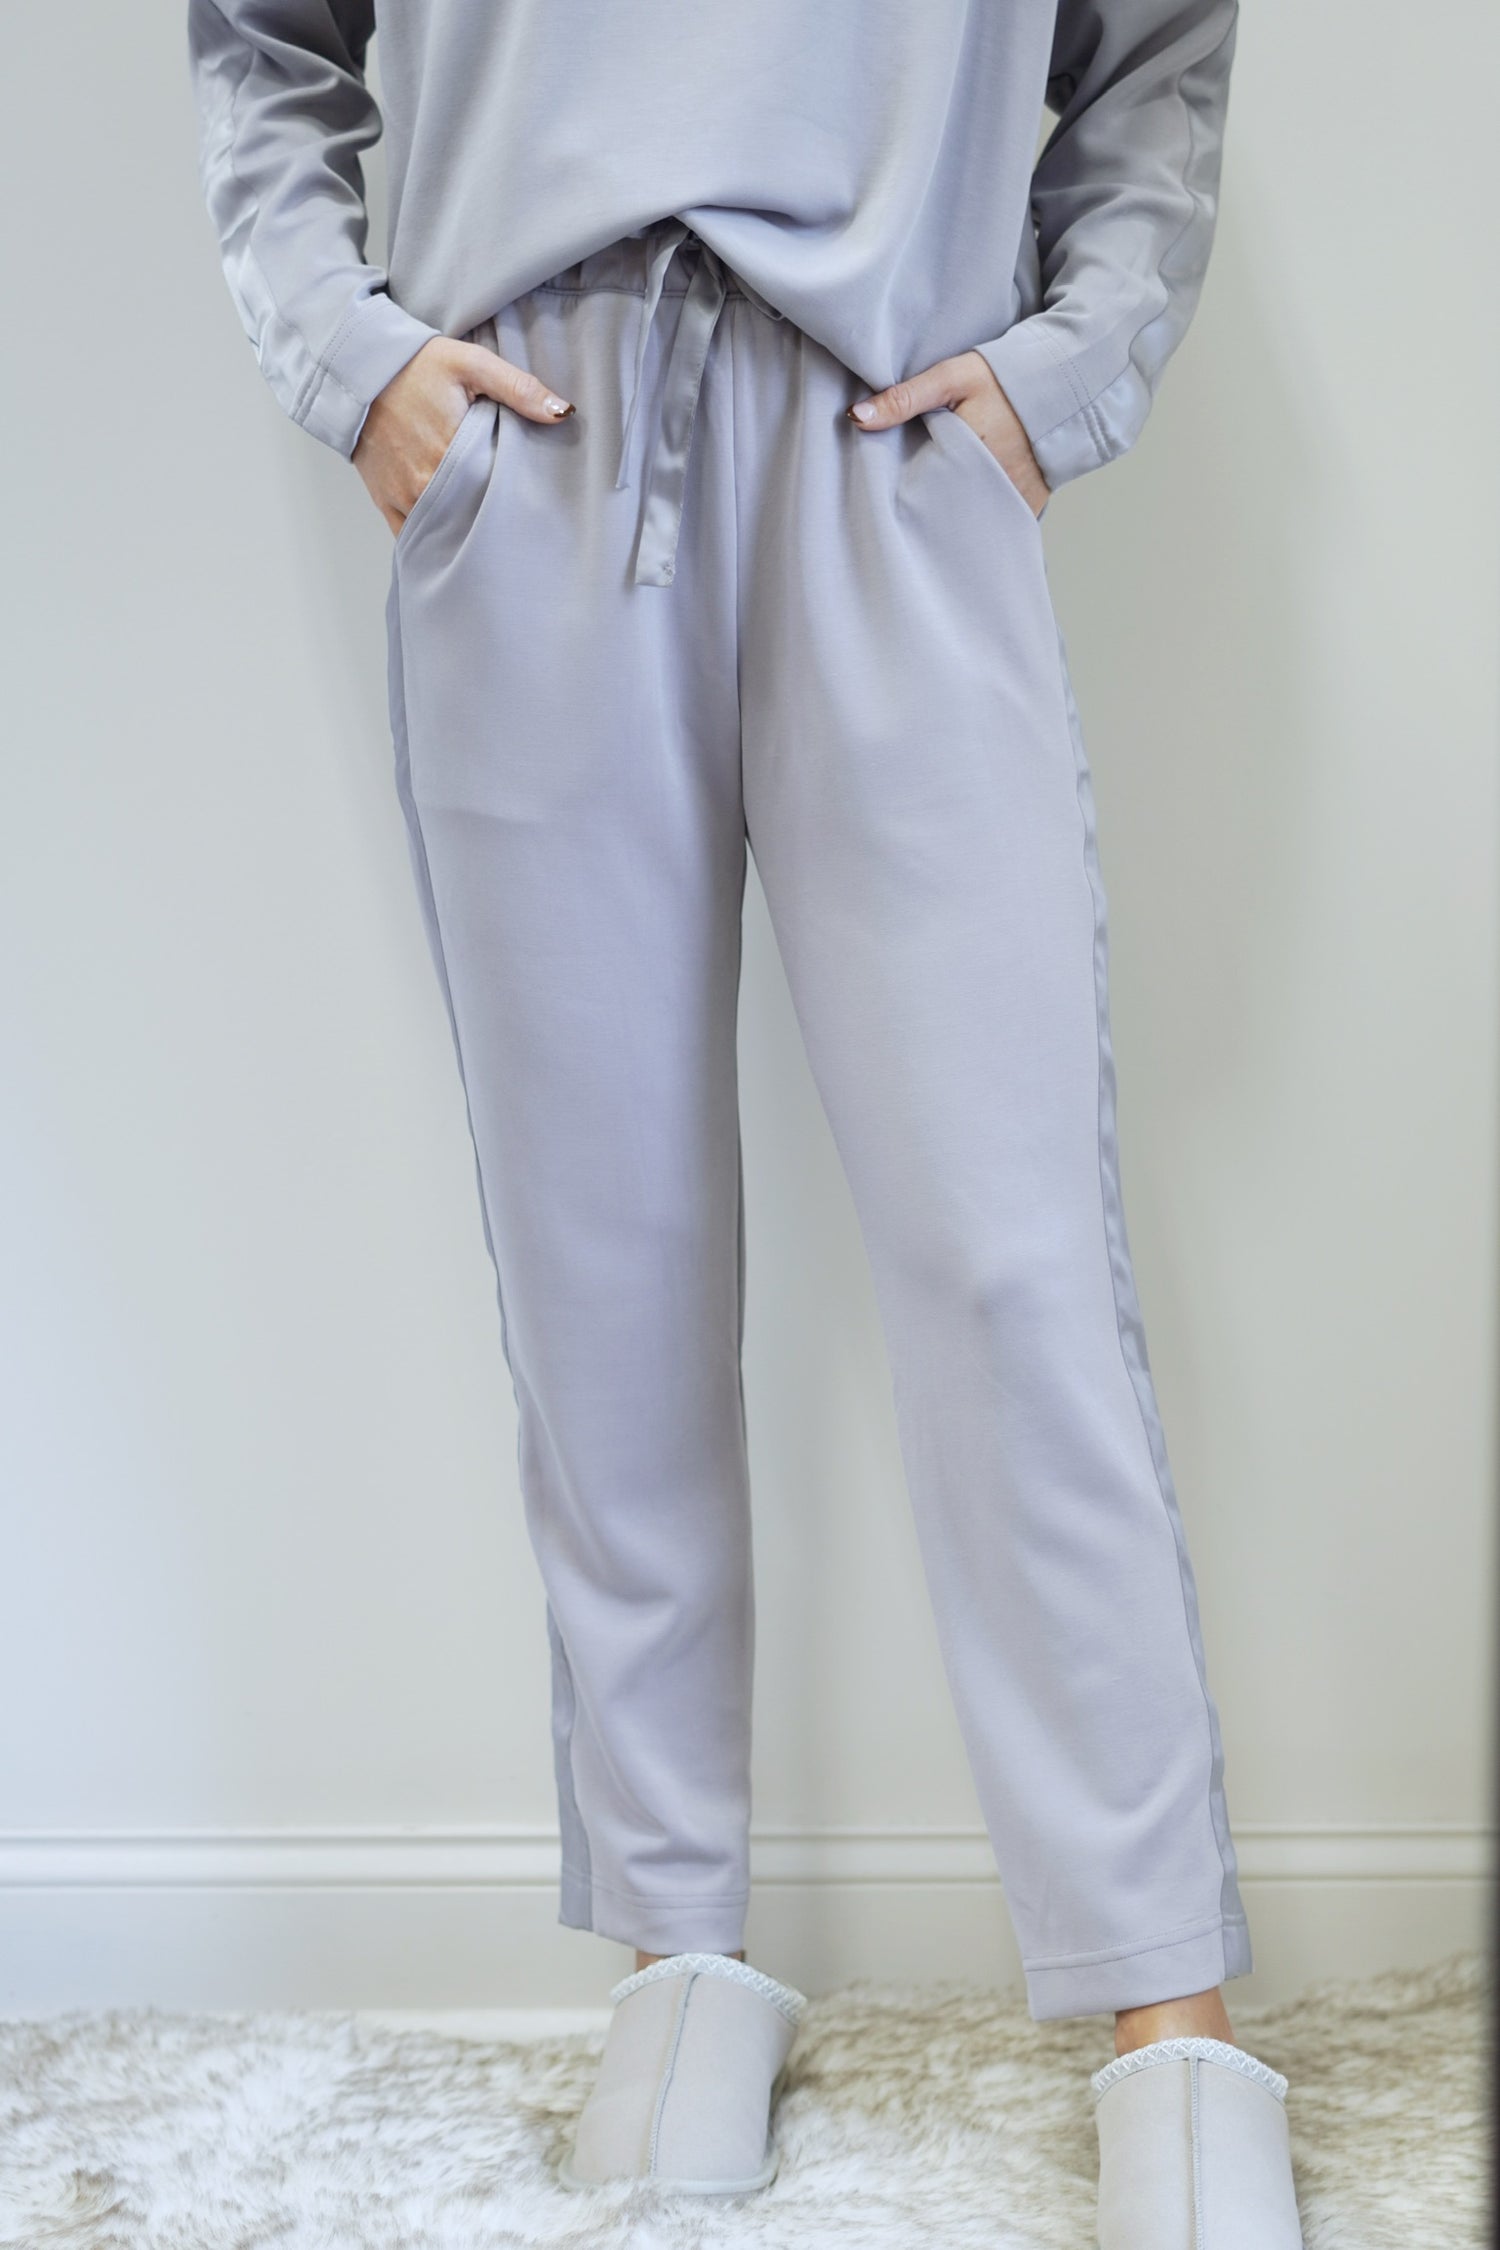 So Sleek Satin Trim Athletic Pant Mid Waisted Elastic Waistband with Tie Satin Trim Detail on Side of Legs Colors:  Mystic Grey Tapered Pant  Ankle Length Relaxed Fit 48% Modal, 46% Polyester, 6% Spandex